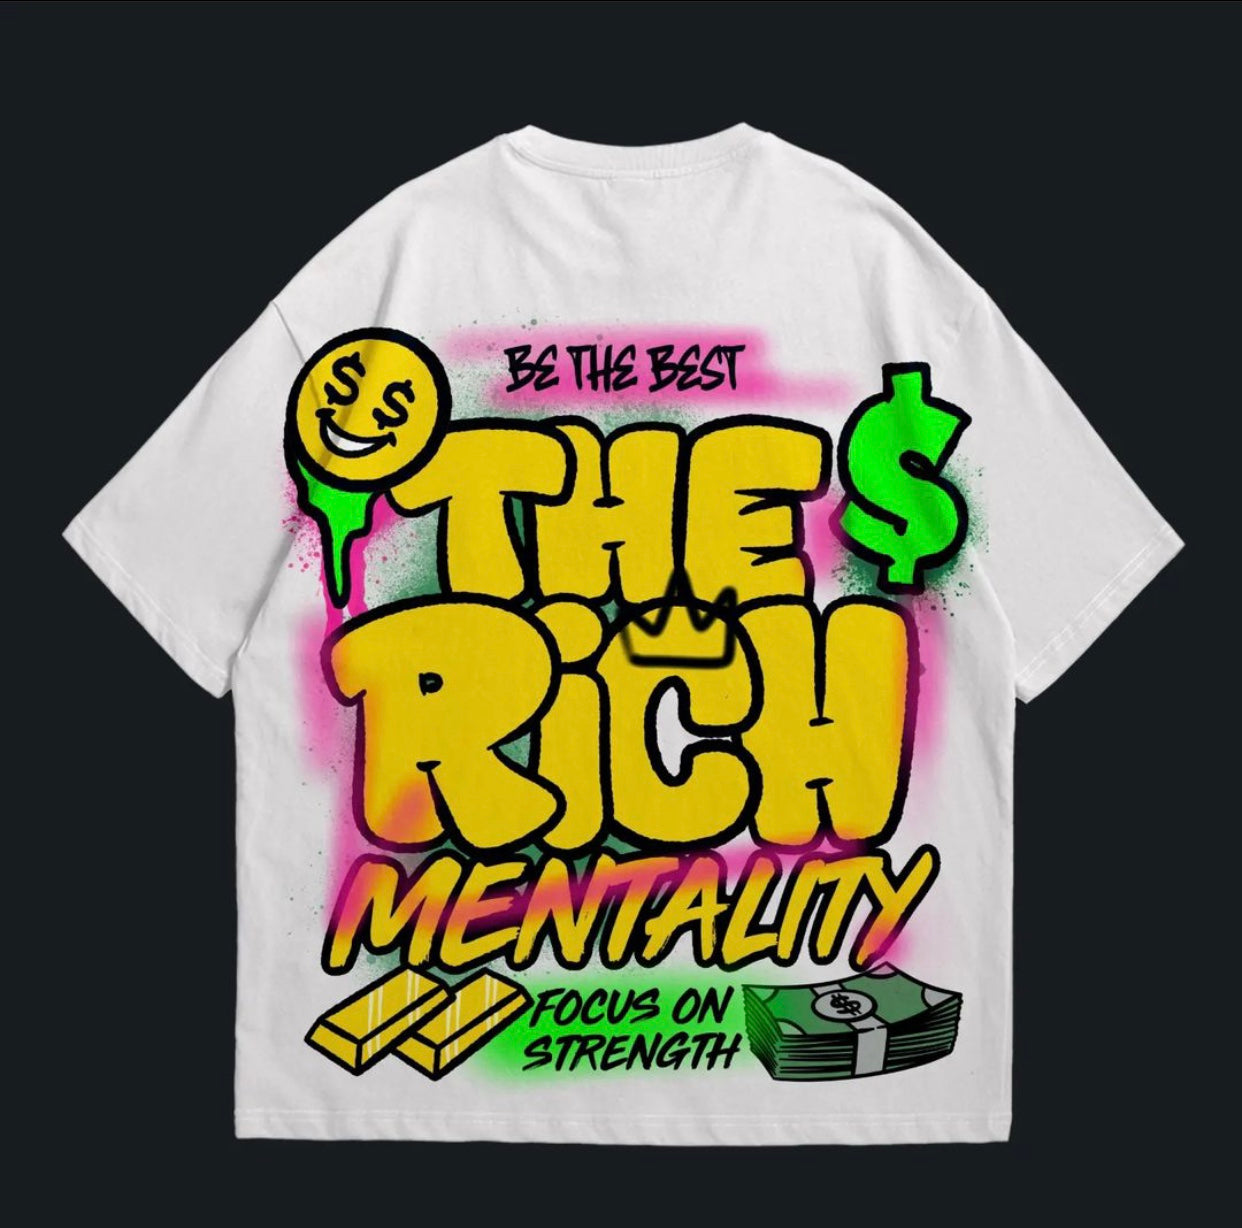 The rich mentality